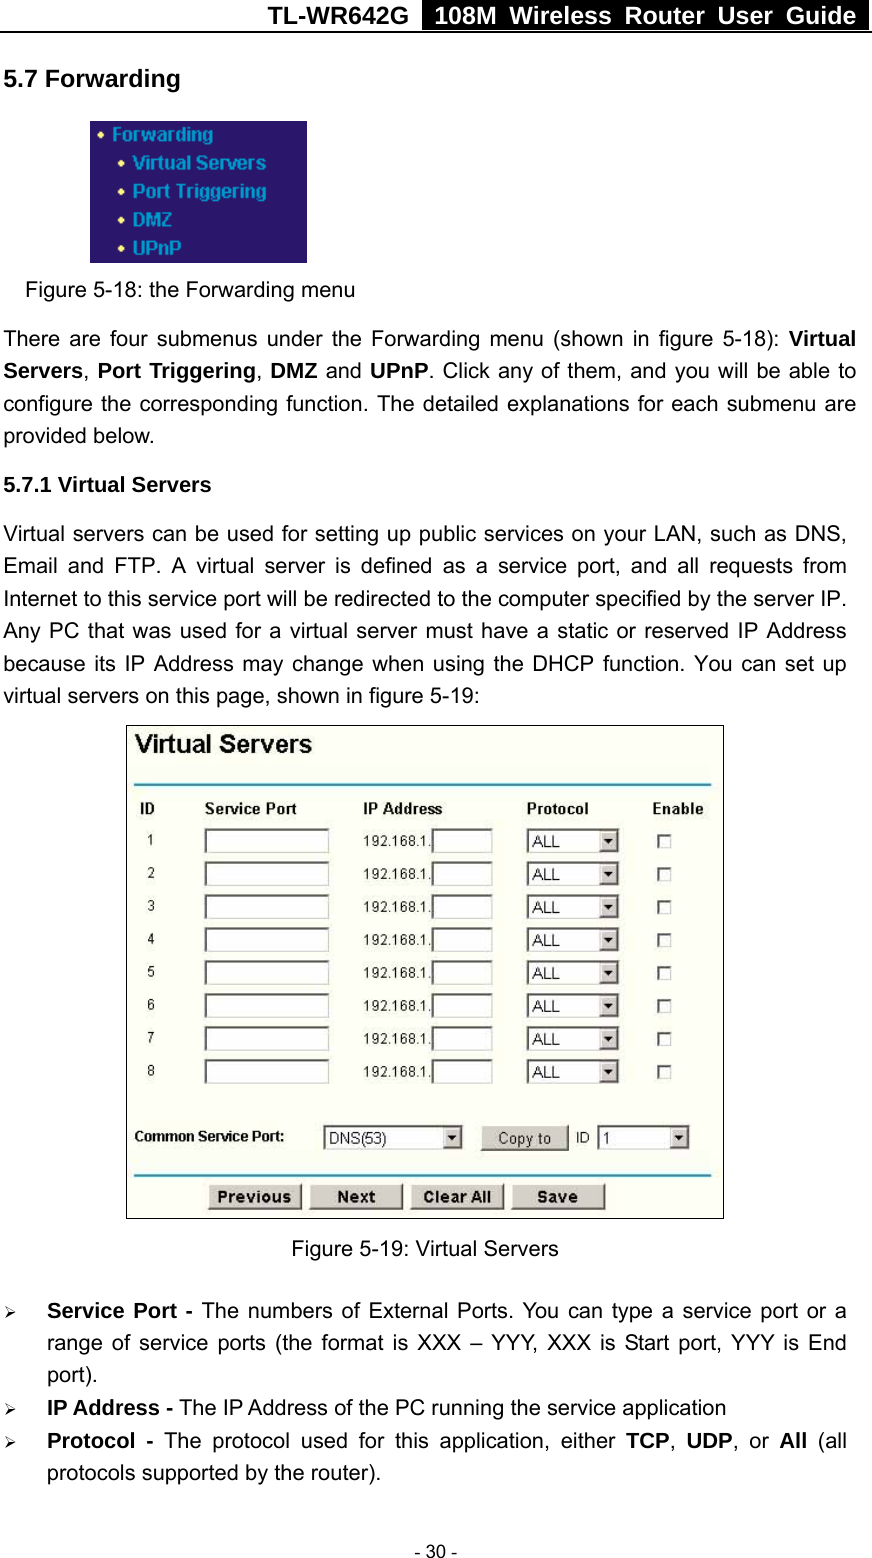 TL-WR642G   108M Wireless Router User Guide   - 30 - 5.7 Forwarding     Figure 5-18: the Forwarding menu There are four submenus under the Forwarding menu (shown in figure 5-18): Virtual Servers, Port Triggering, DMZ and UPnP. Click any of them, and you will be able to configure the corresponding function. The detailed explanations for each submenu are provided below. 5.7.1 Virtual Servers Virtual servers can be used for setting up public services on your LAN, such as DNS, Email and FTP. A virtual server is defined as a service port, and all requests from Internet to this service port will be redirected to the computer specified by the server IP. Any PC that was used for a virtual server must have a static or reserved IP Address because its IP Address may change when using the DHCP function. You can set up virtual servers on this page, shown in figure 5-19:  Figure 5-19: Virtual Servers ¾ Service Port - The numbers of External Ports. You can type a service port or a range of service ports (the format is XXX – YYY, XXX is Start port, YYY is End port).  ¾ IP Address - The IP Address of the PC running the service application ¾ Protocol - The protocol used for this application, either TCP,  UDP, or All  (all protocols supported by the router). 